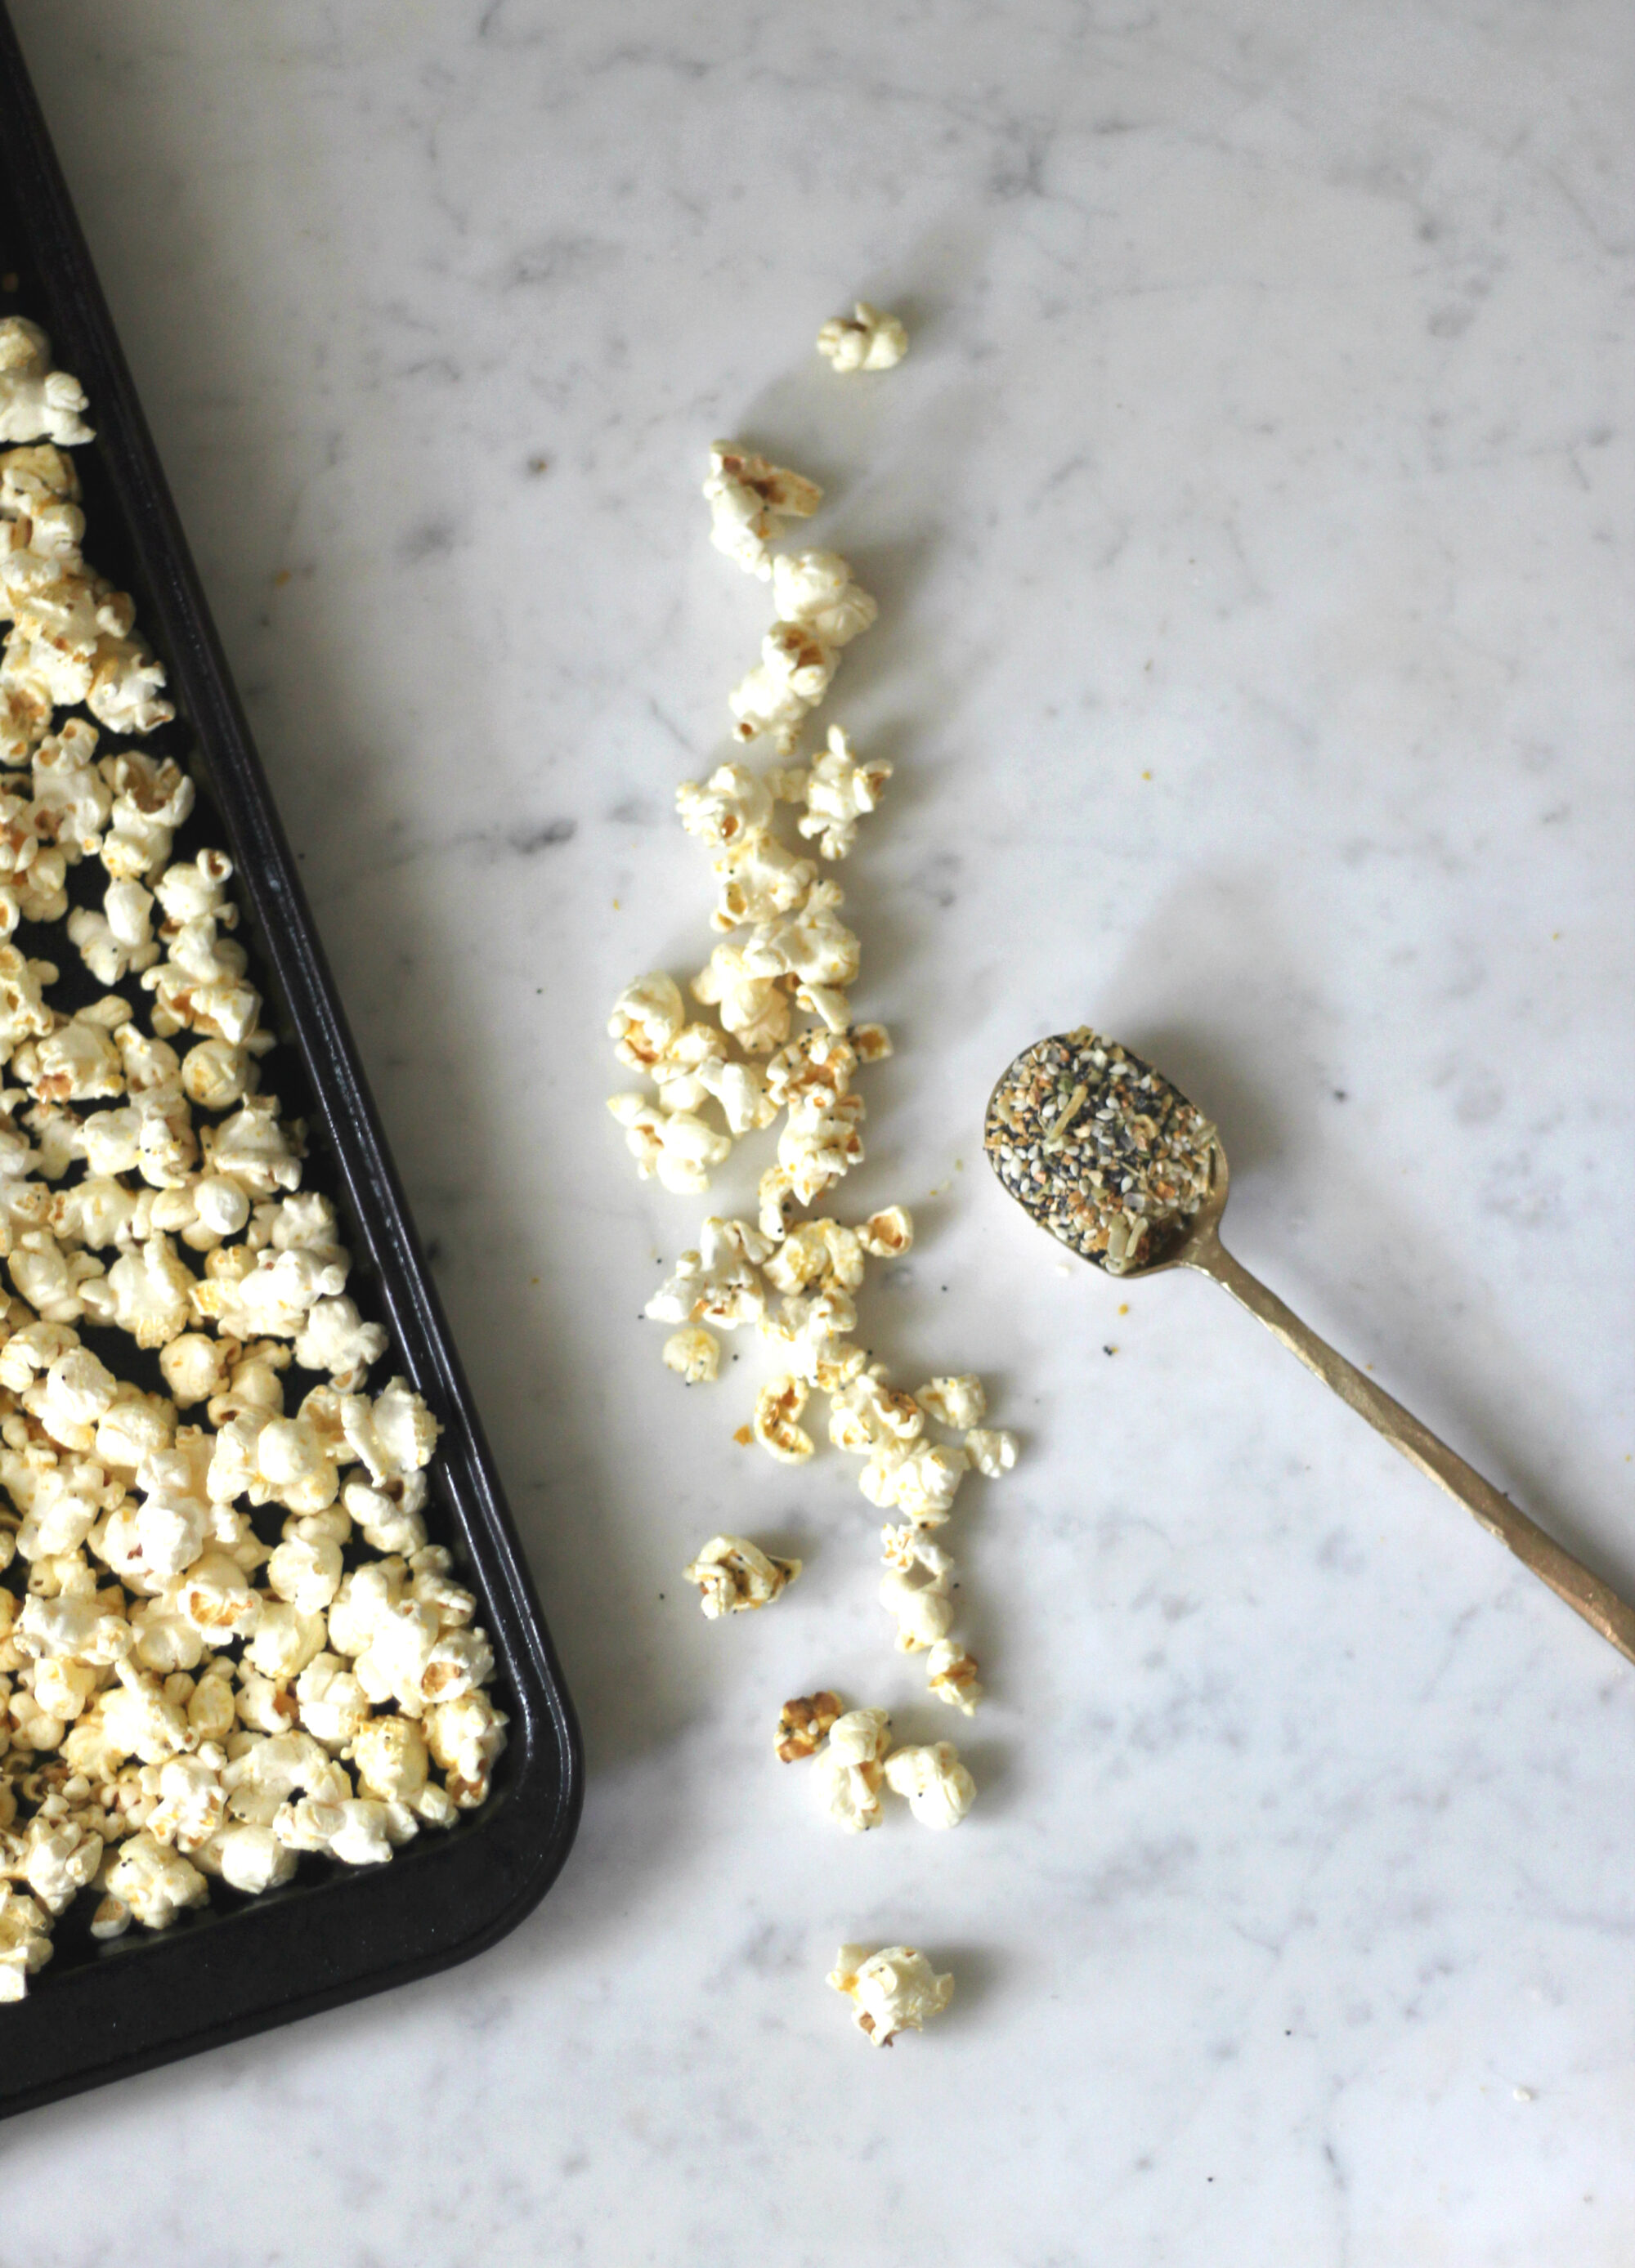 Everything Bagel Popcorn with Everything Spice & Nutritional Yeast